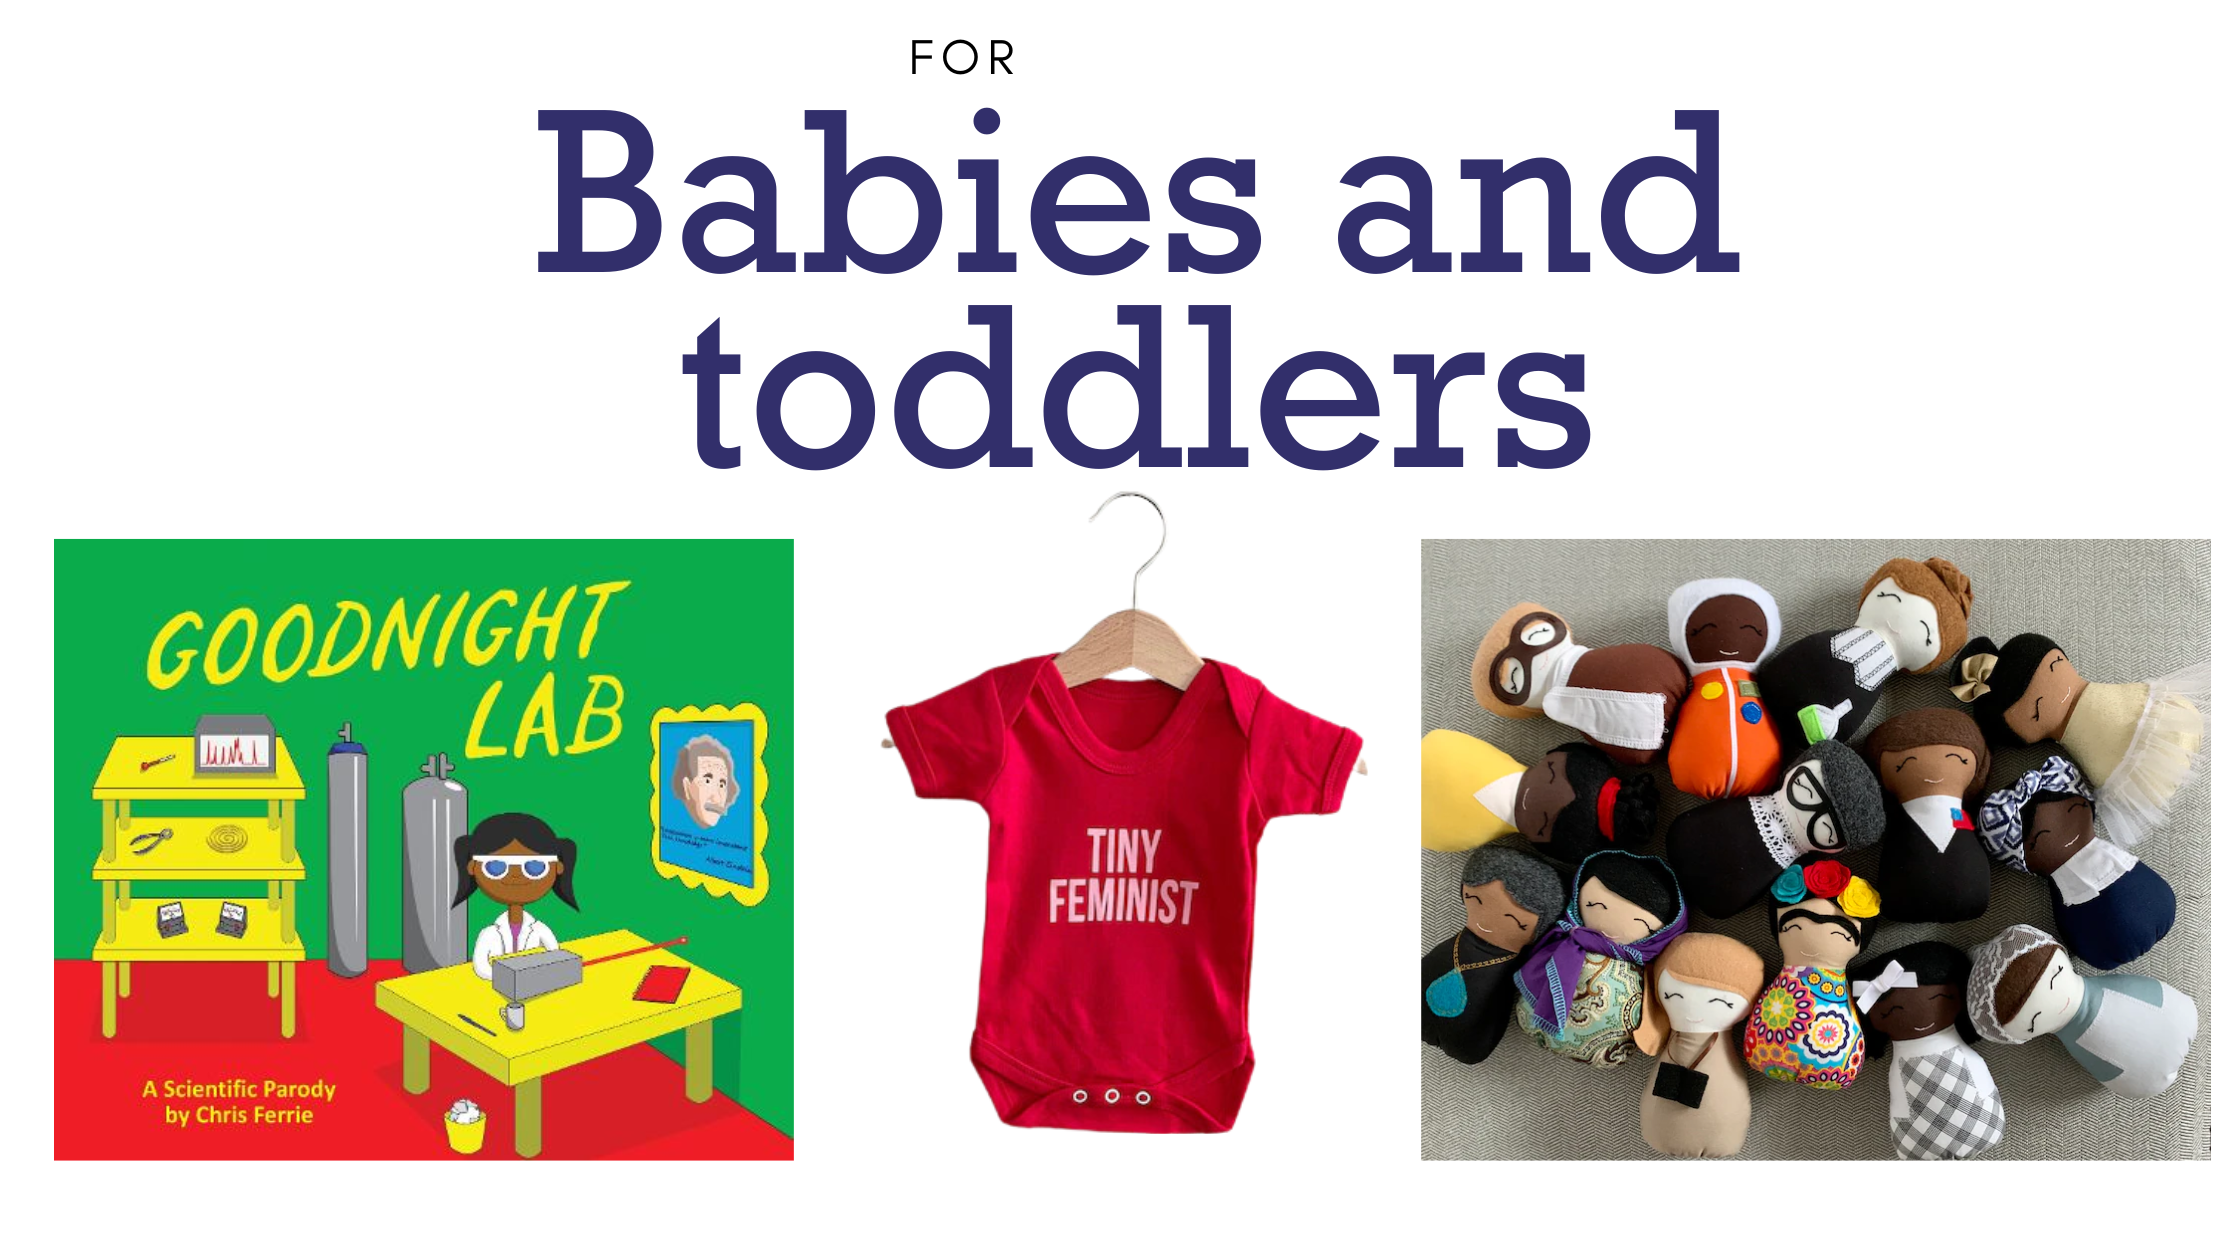 Images of a book cover, toys and a baby grow saying "feminist in training"